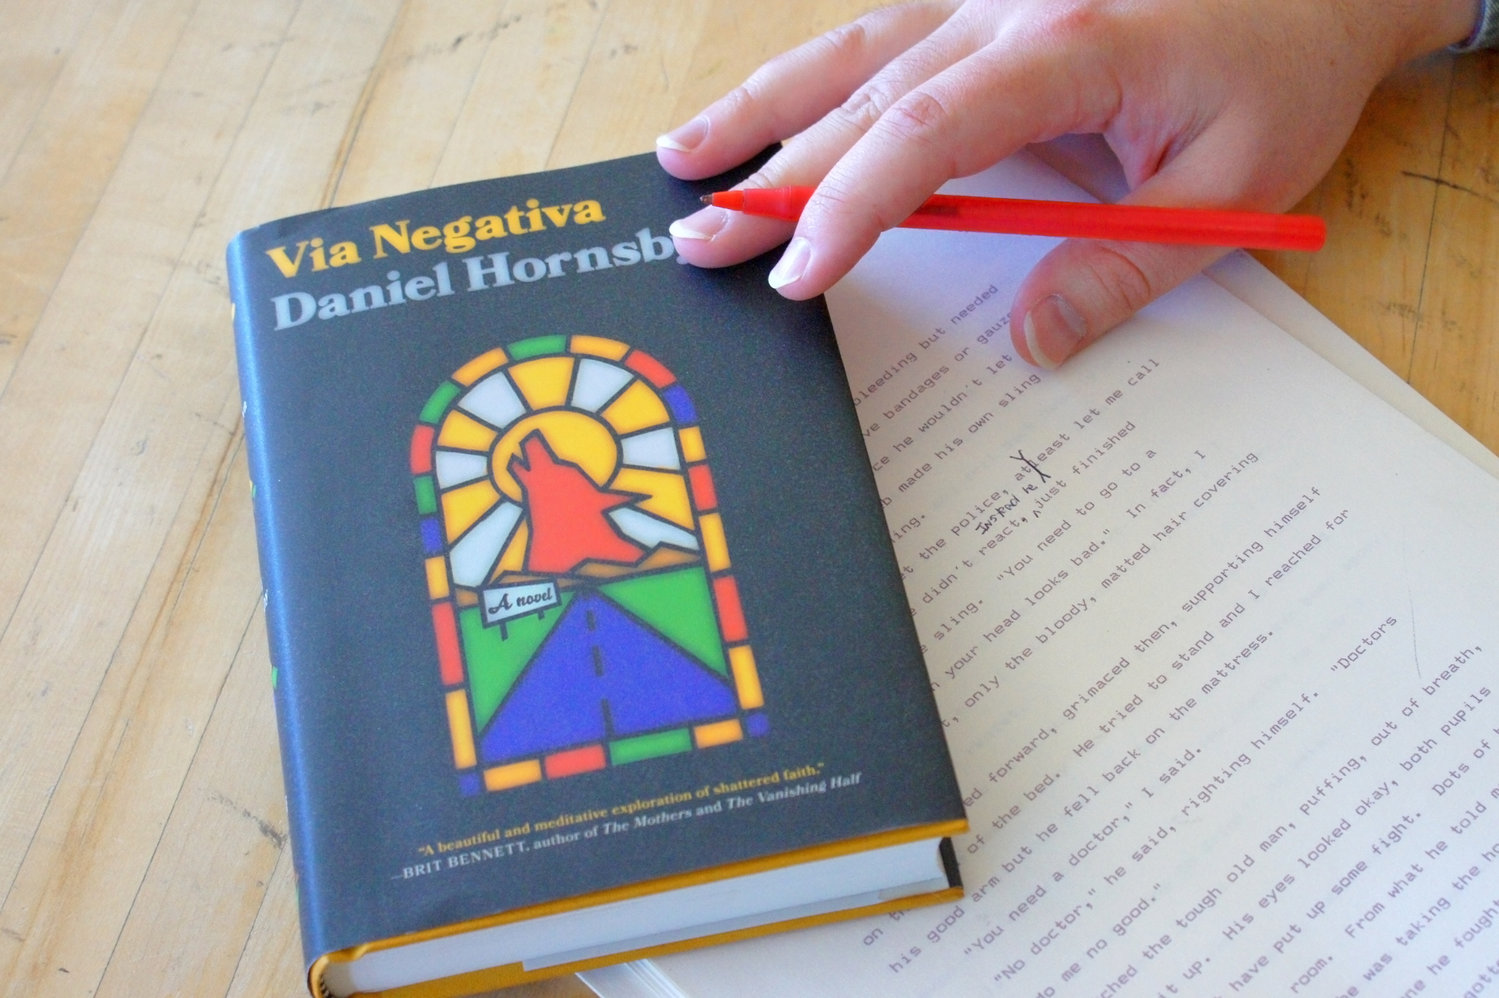 Longfellow resident Dan Hornsby published his first book, "Via Negativa," in 2020. (Photo by Terry Faust)